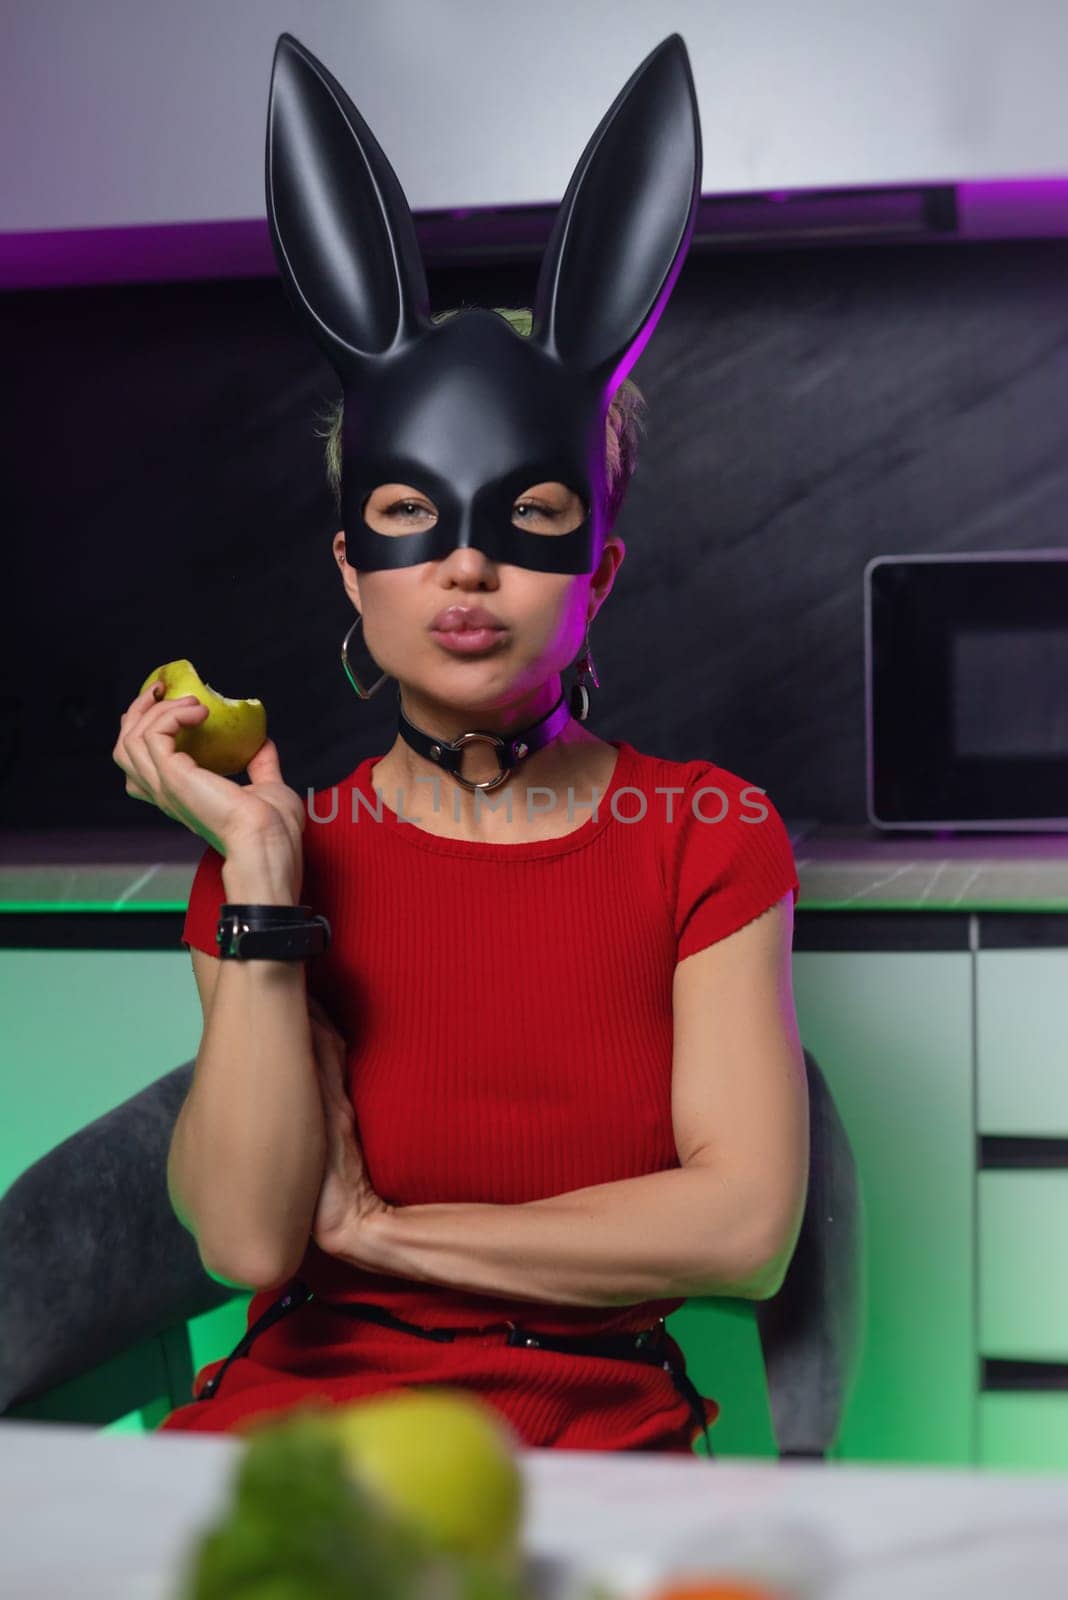 beautiful girl in bdsm rabbit mask and a bright red dress eats an apple in the kitchen in neon light promoting a healthy lifestyle vegetarianism